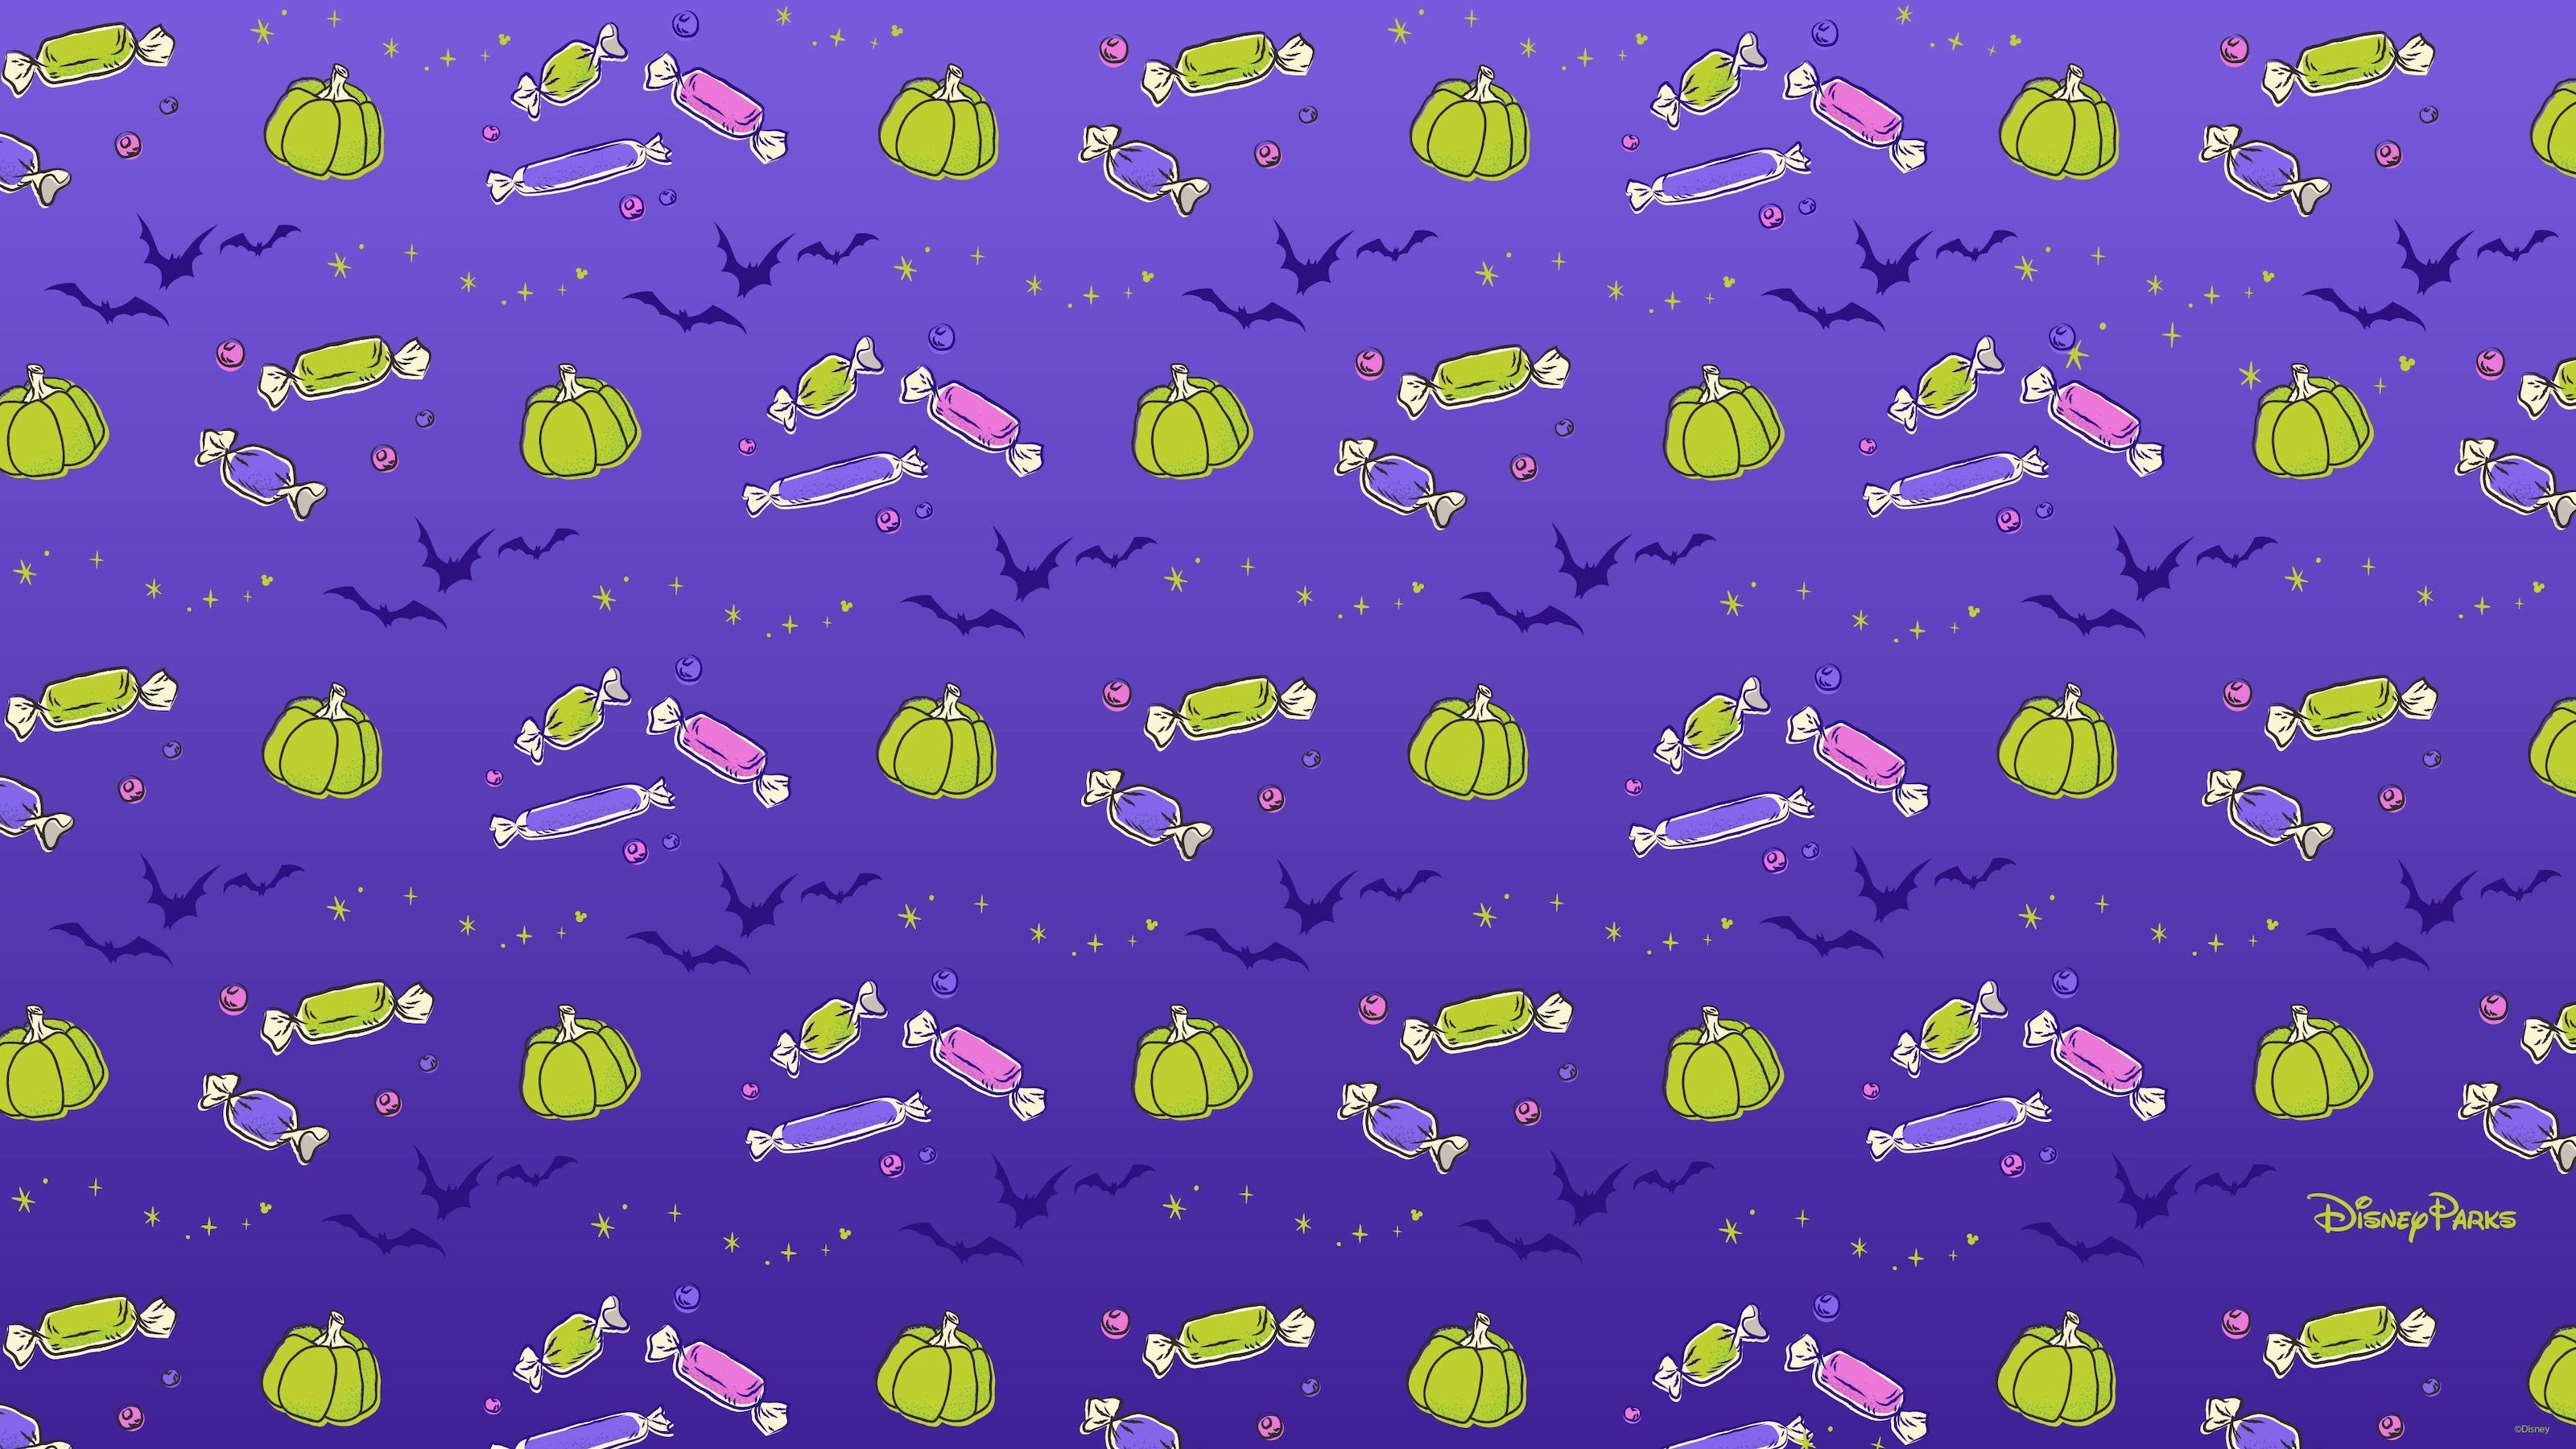 5 Ways to Have a Disney Halloween: New Wallpapers, Backgrounds and Other  Treats | Disney Parks Blog